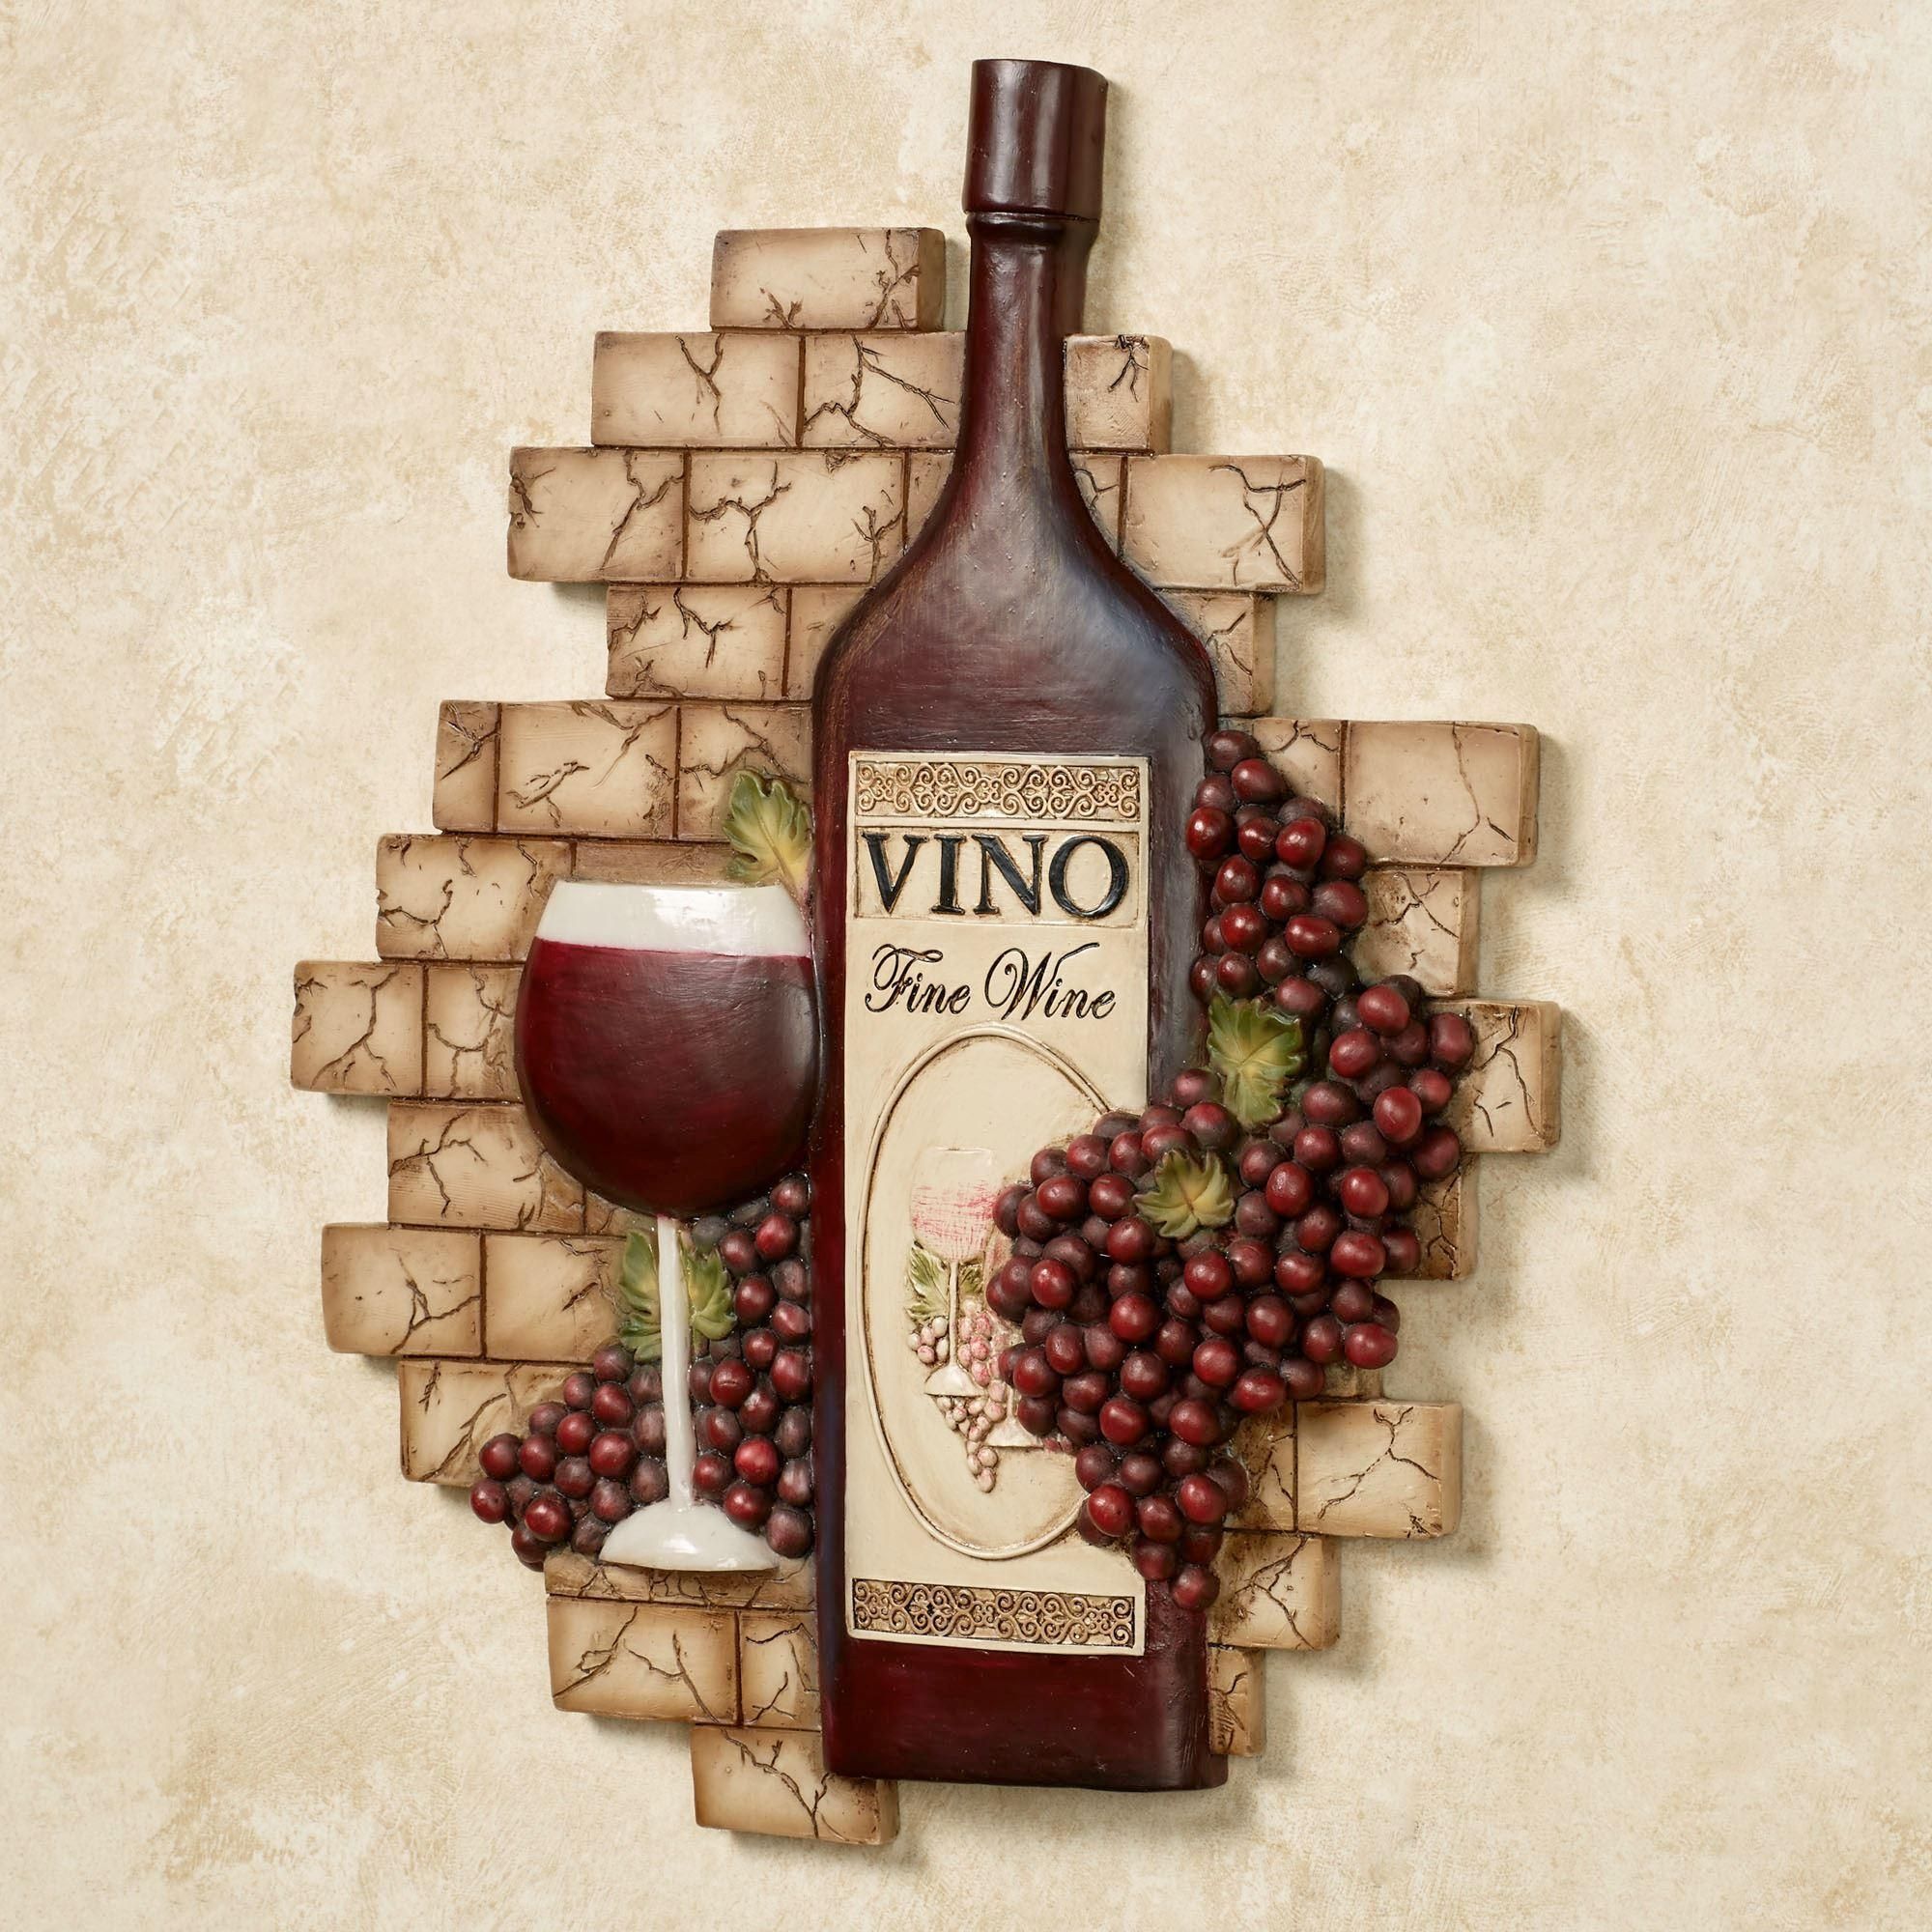 Grapes And Wine Home Decor | Touch Of Class Regarding Grape Wall Art (View 5 of 20)